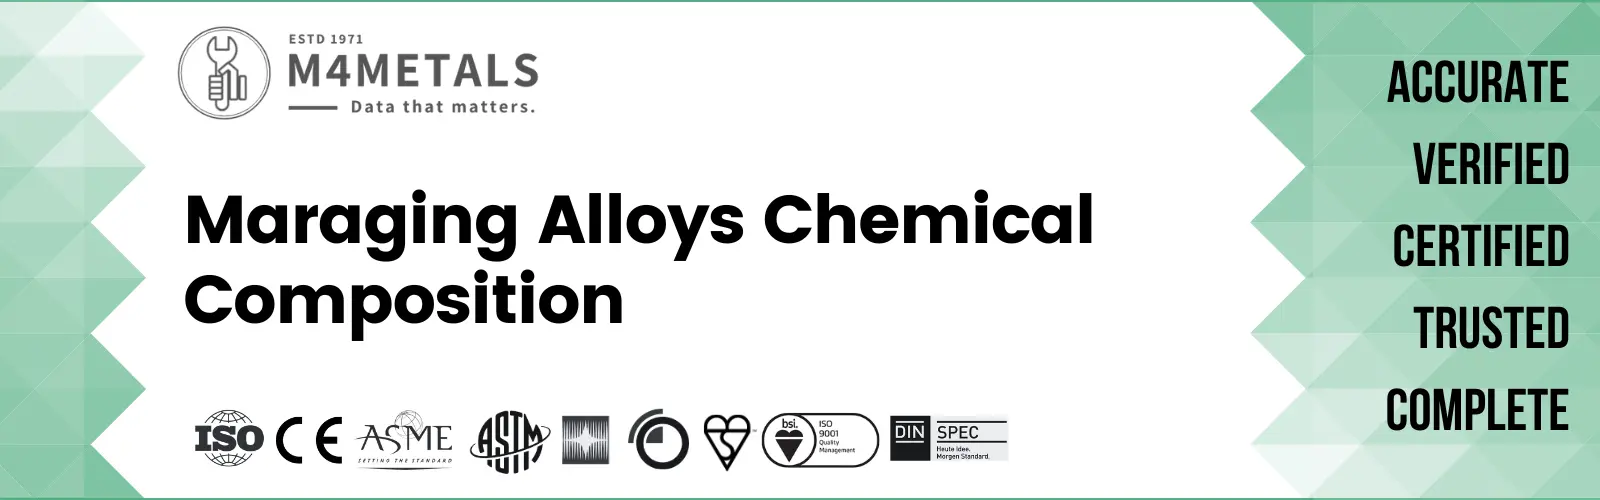 Maraging Alloy Chemical Composition